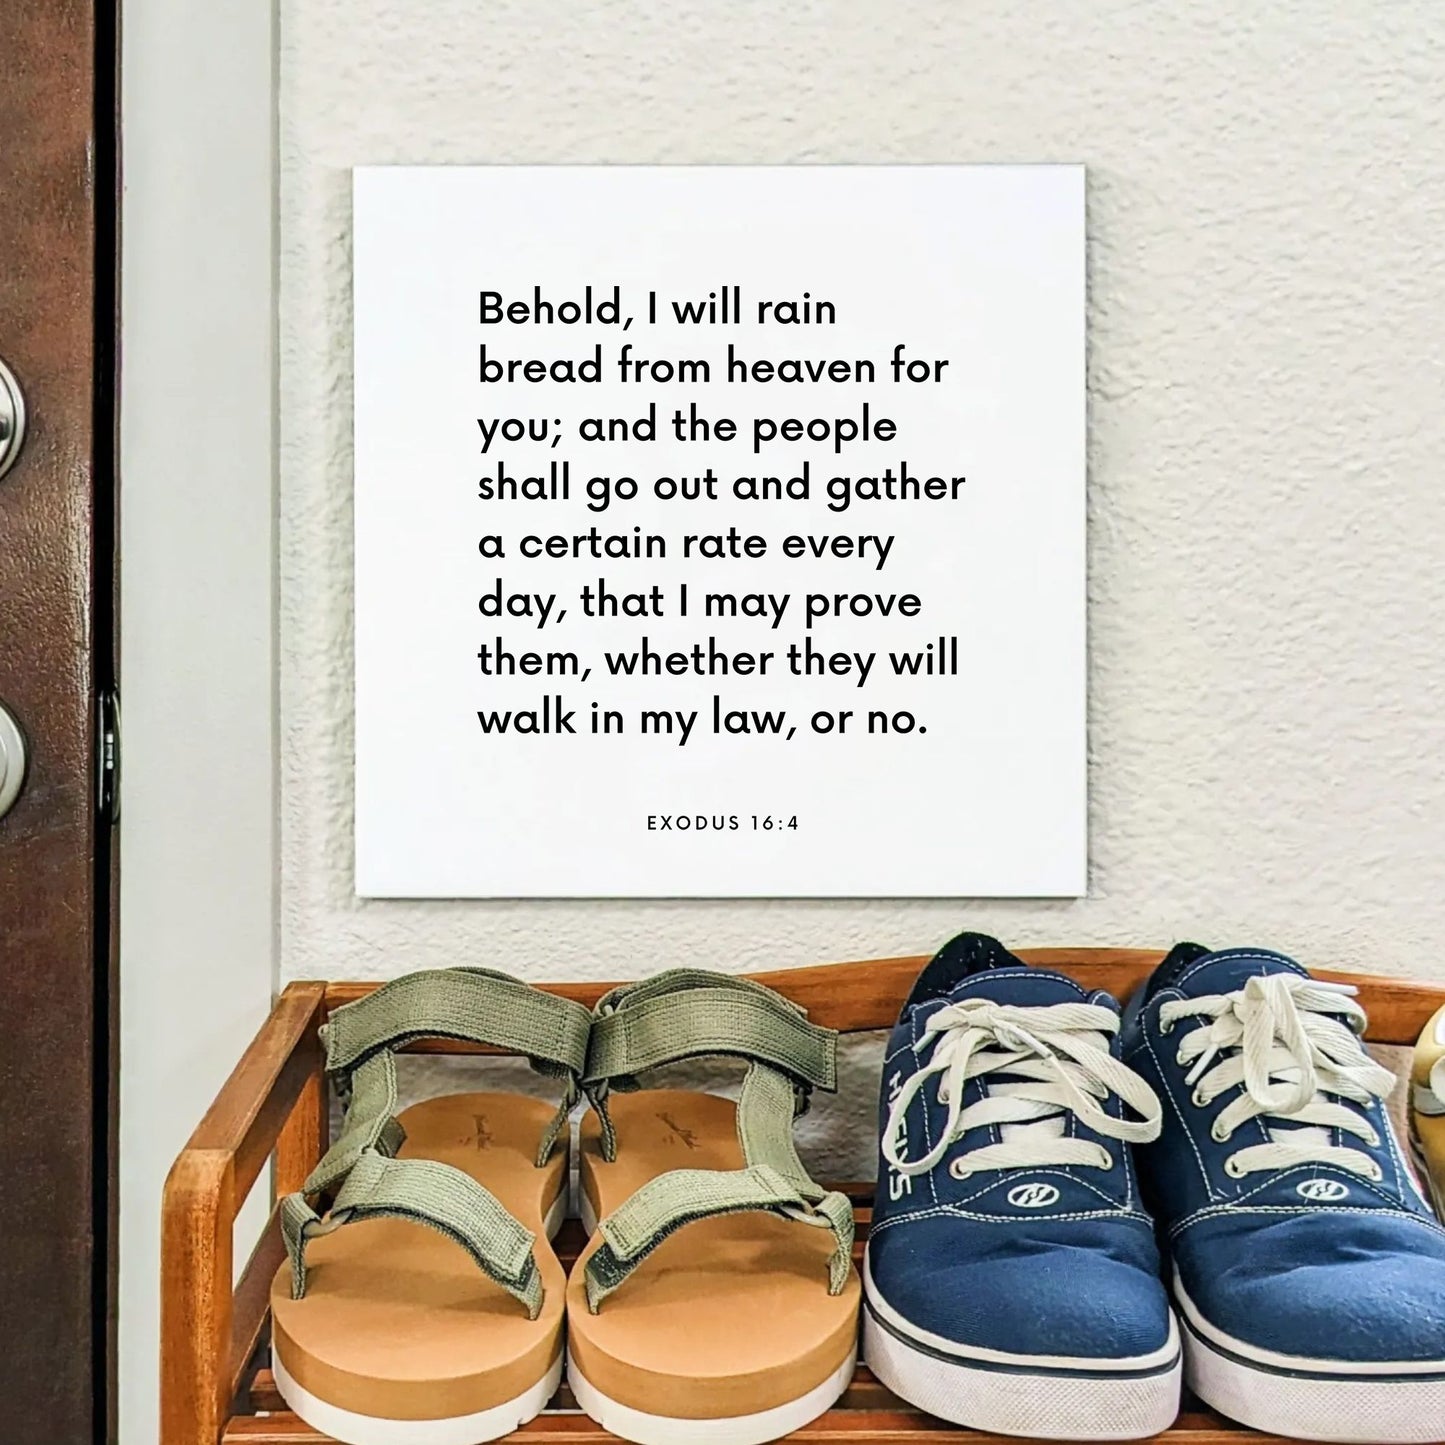 Shoes mouting of the scripture tile for Exodus 16:4 - "That I may prove them, whether they will walk in my law"